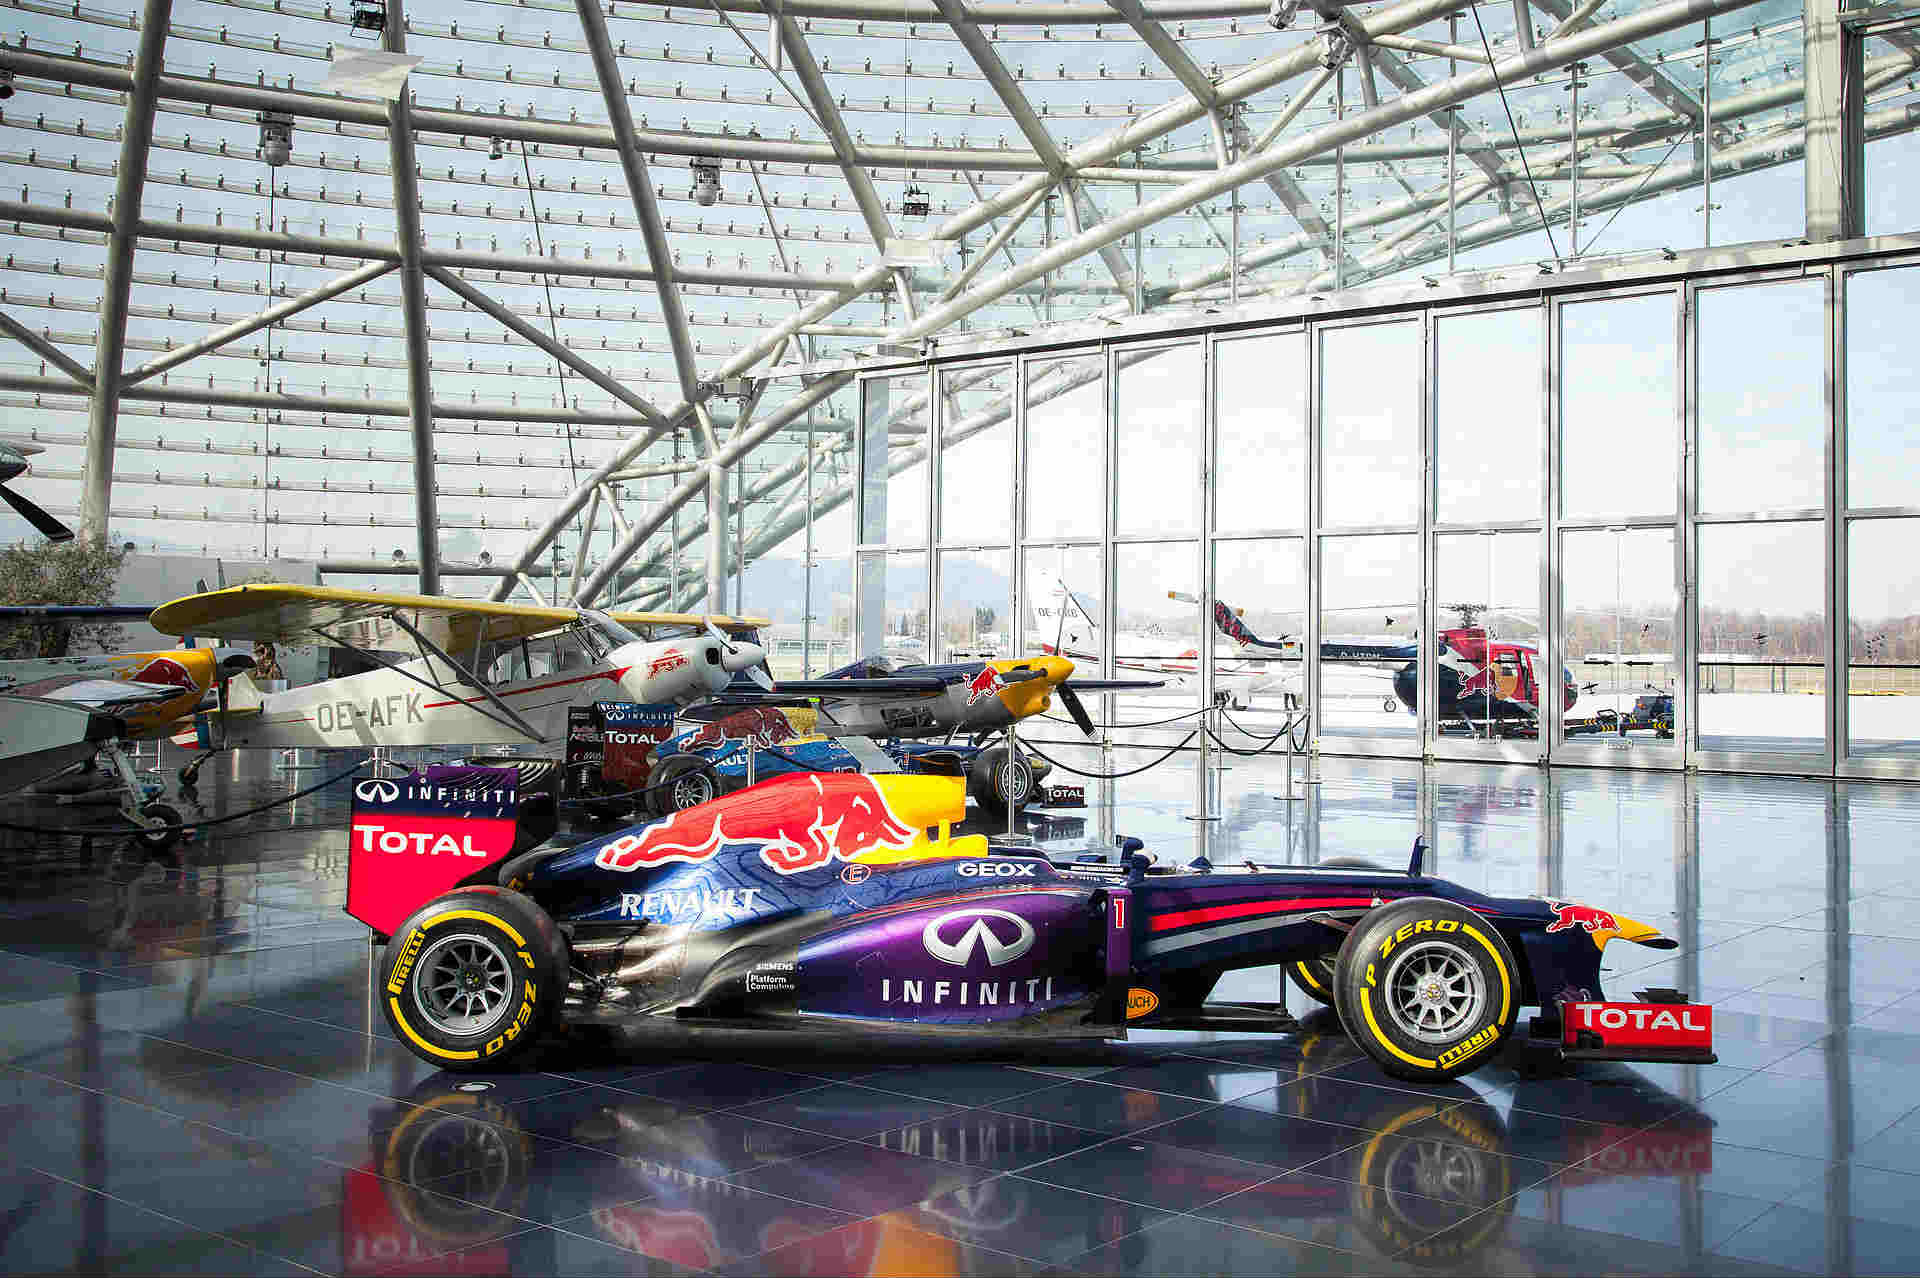 HANGAR-7 REDBULL - AUTOMOTIVE - The most important directory of museums collections dedicated to vehicles